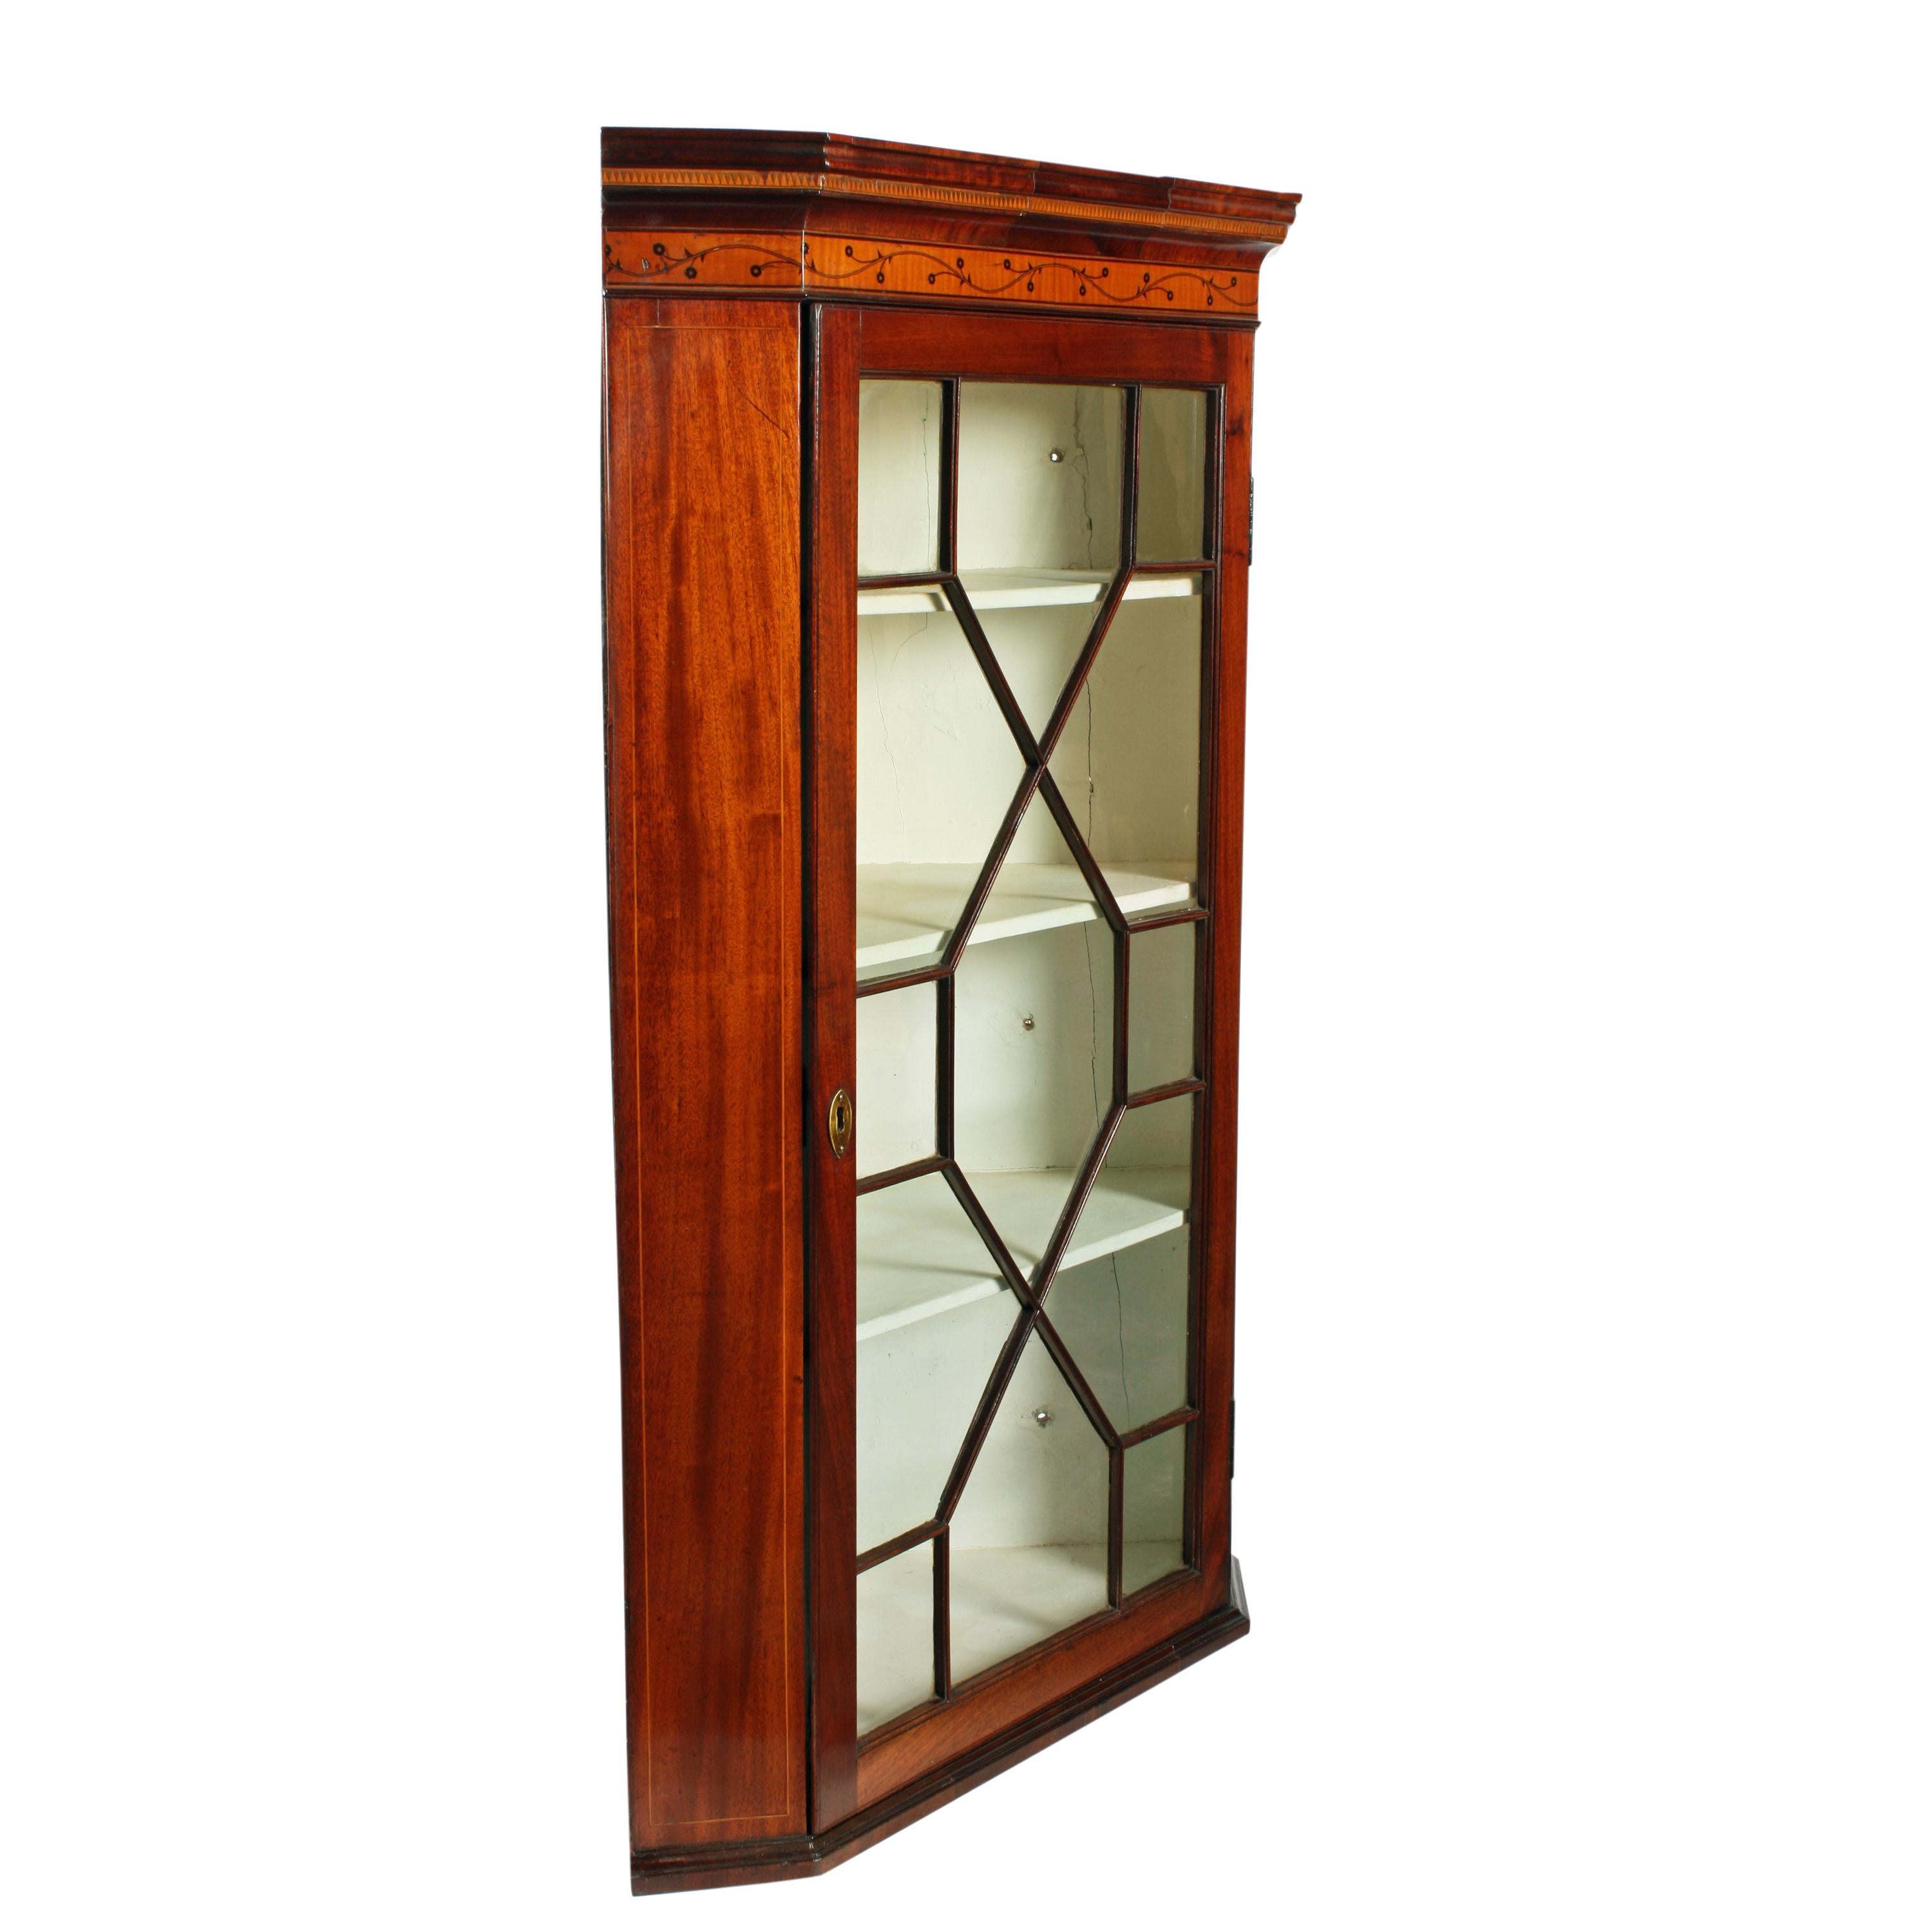 An 18th century Georgian mahogany wall hanging corner cabinet.

The cabinet has a glazed door with thirteen panes of glass held in fine mahogany astragal bars.

The interior has three fixed shelves and has been re-painted in the past.

The cabinet